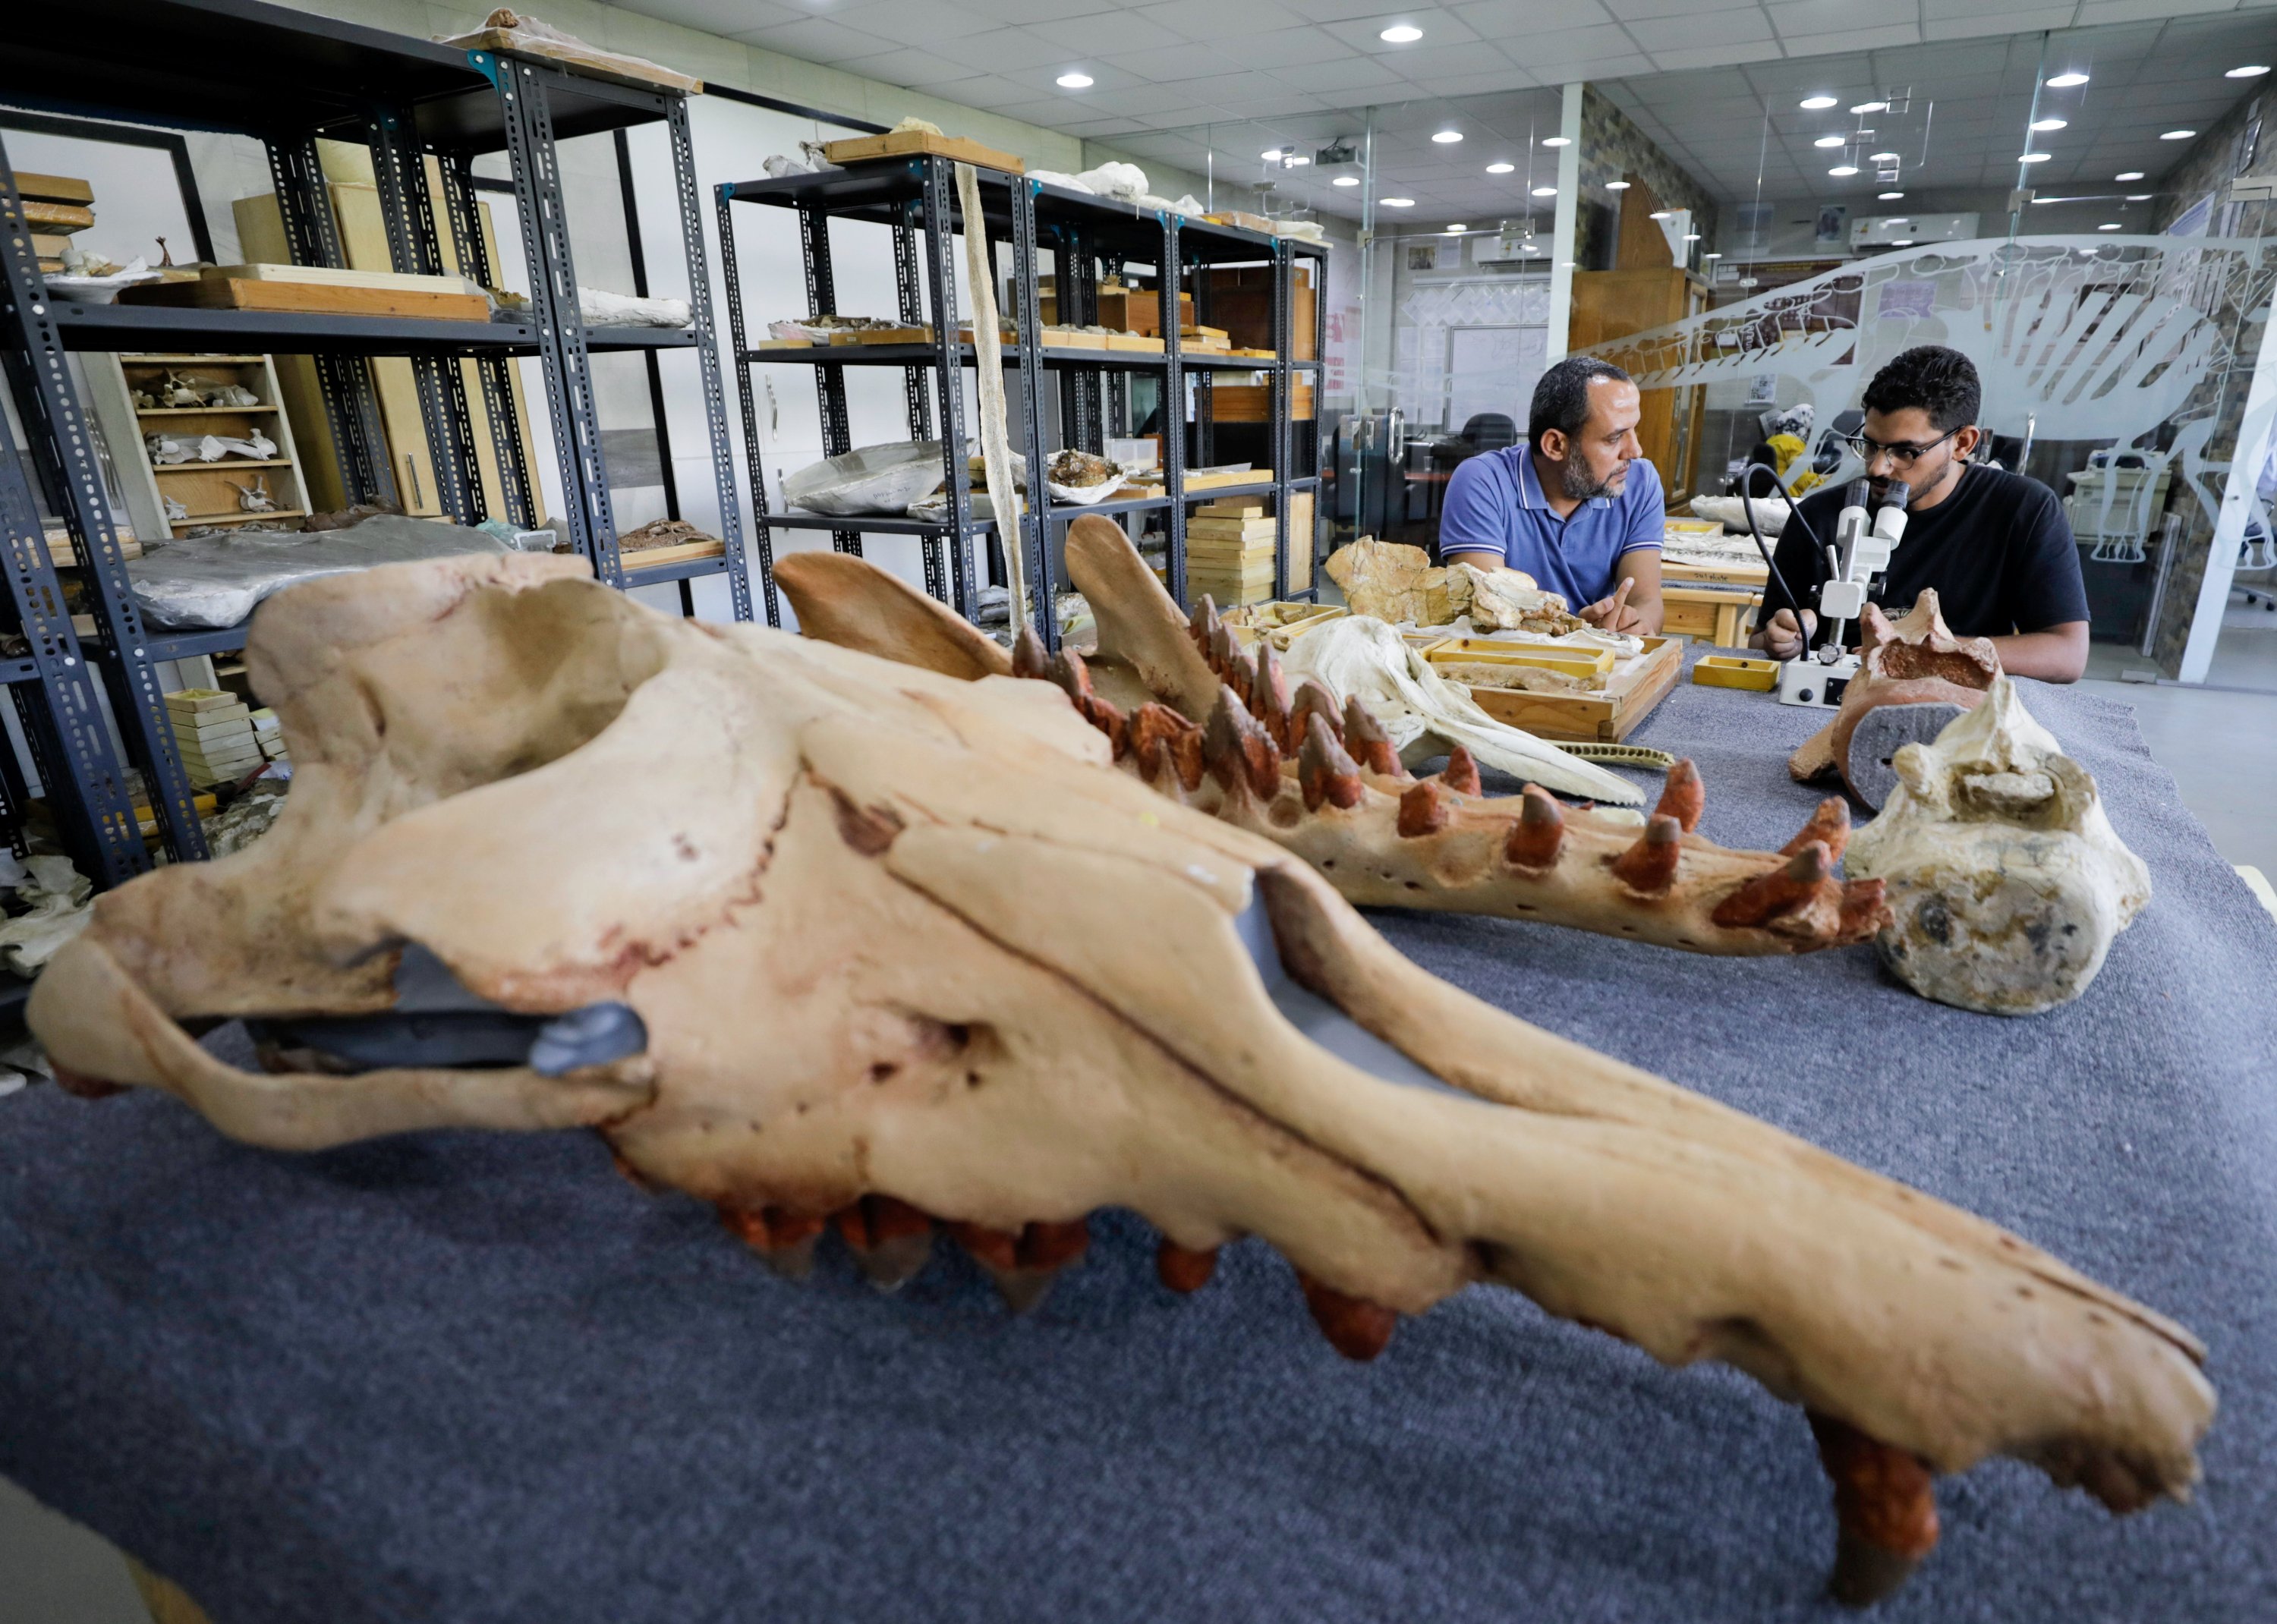 Abdullah Gohar, a researcher at El Mansoura university, works on renovating the 43 million-year-old fossil of a previously unknown amphibious four-legged whale species called "Phiomicetus anubis" that helps trace the transition of whales from land to sea, discovered in the Fayum Depression in the Western Desert, near the town of El Mansoura, north of Cairo, Egypt, August 26, 2021. (Reuters Photo) 